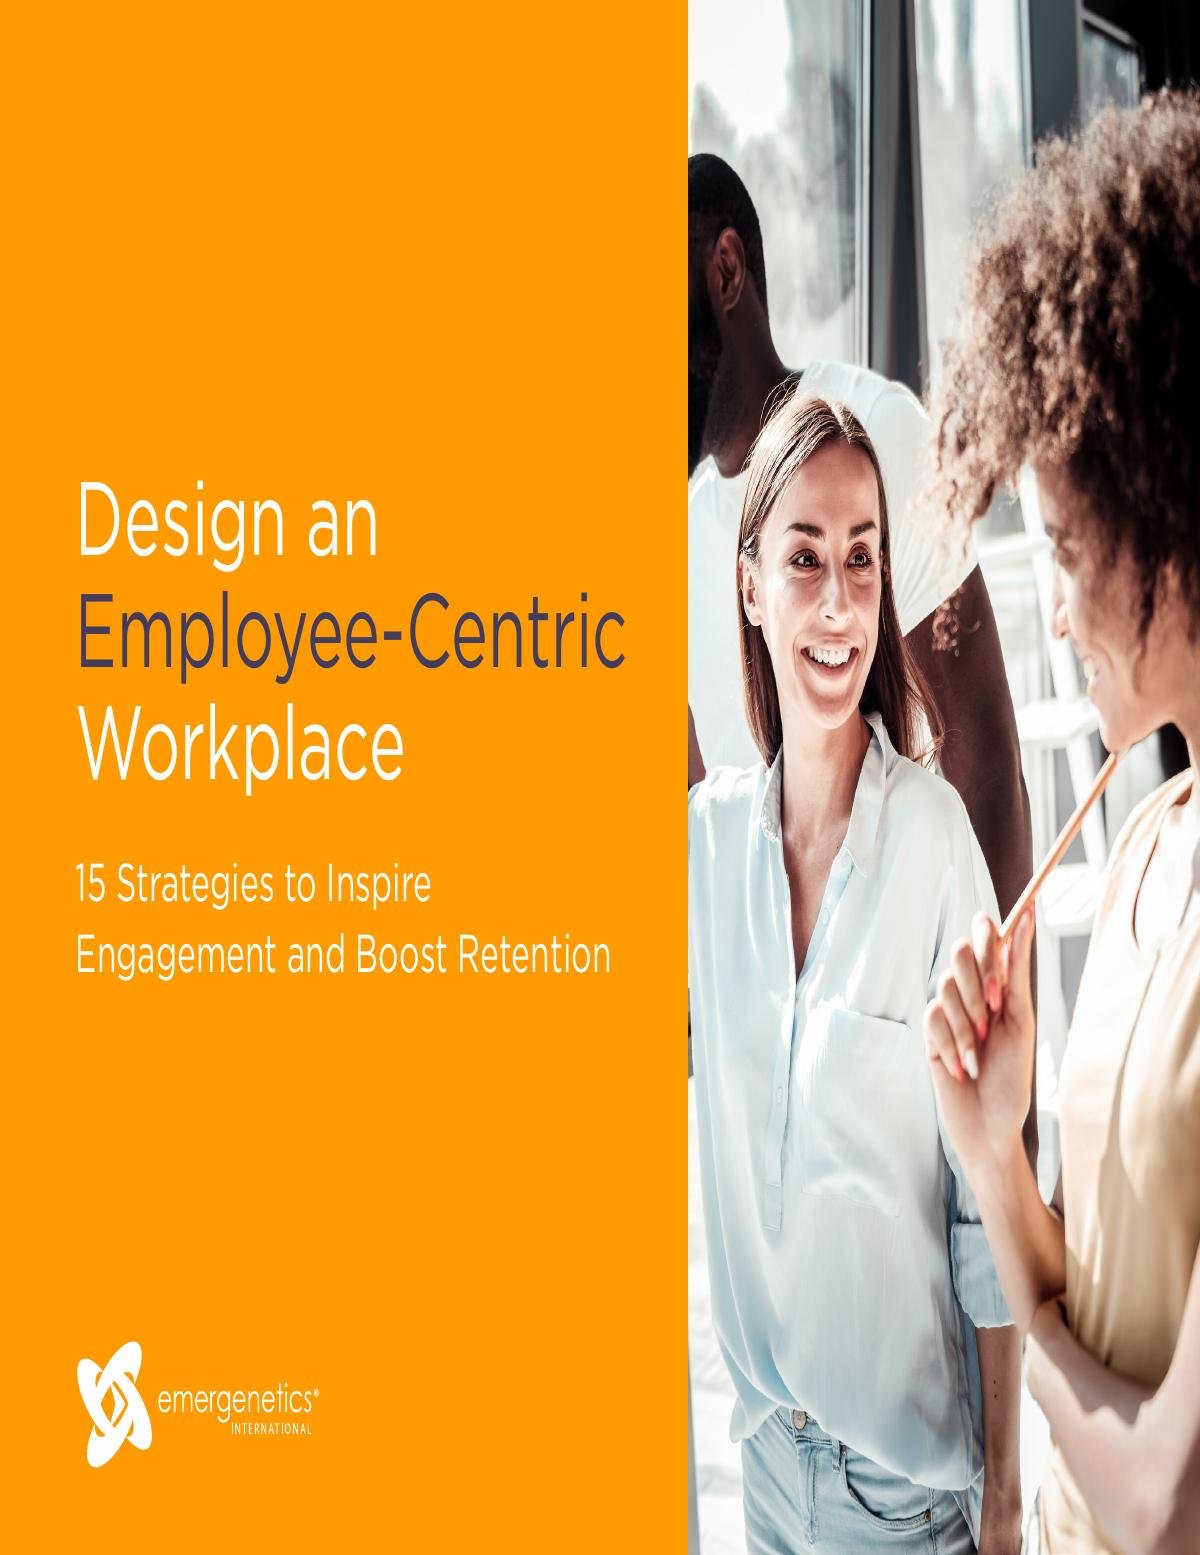 Design an Employee-Centric Workplace: 15 Strategies to Inspire Engagement and Boost Retention